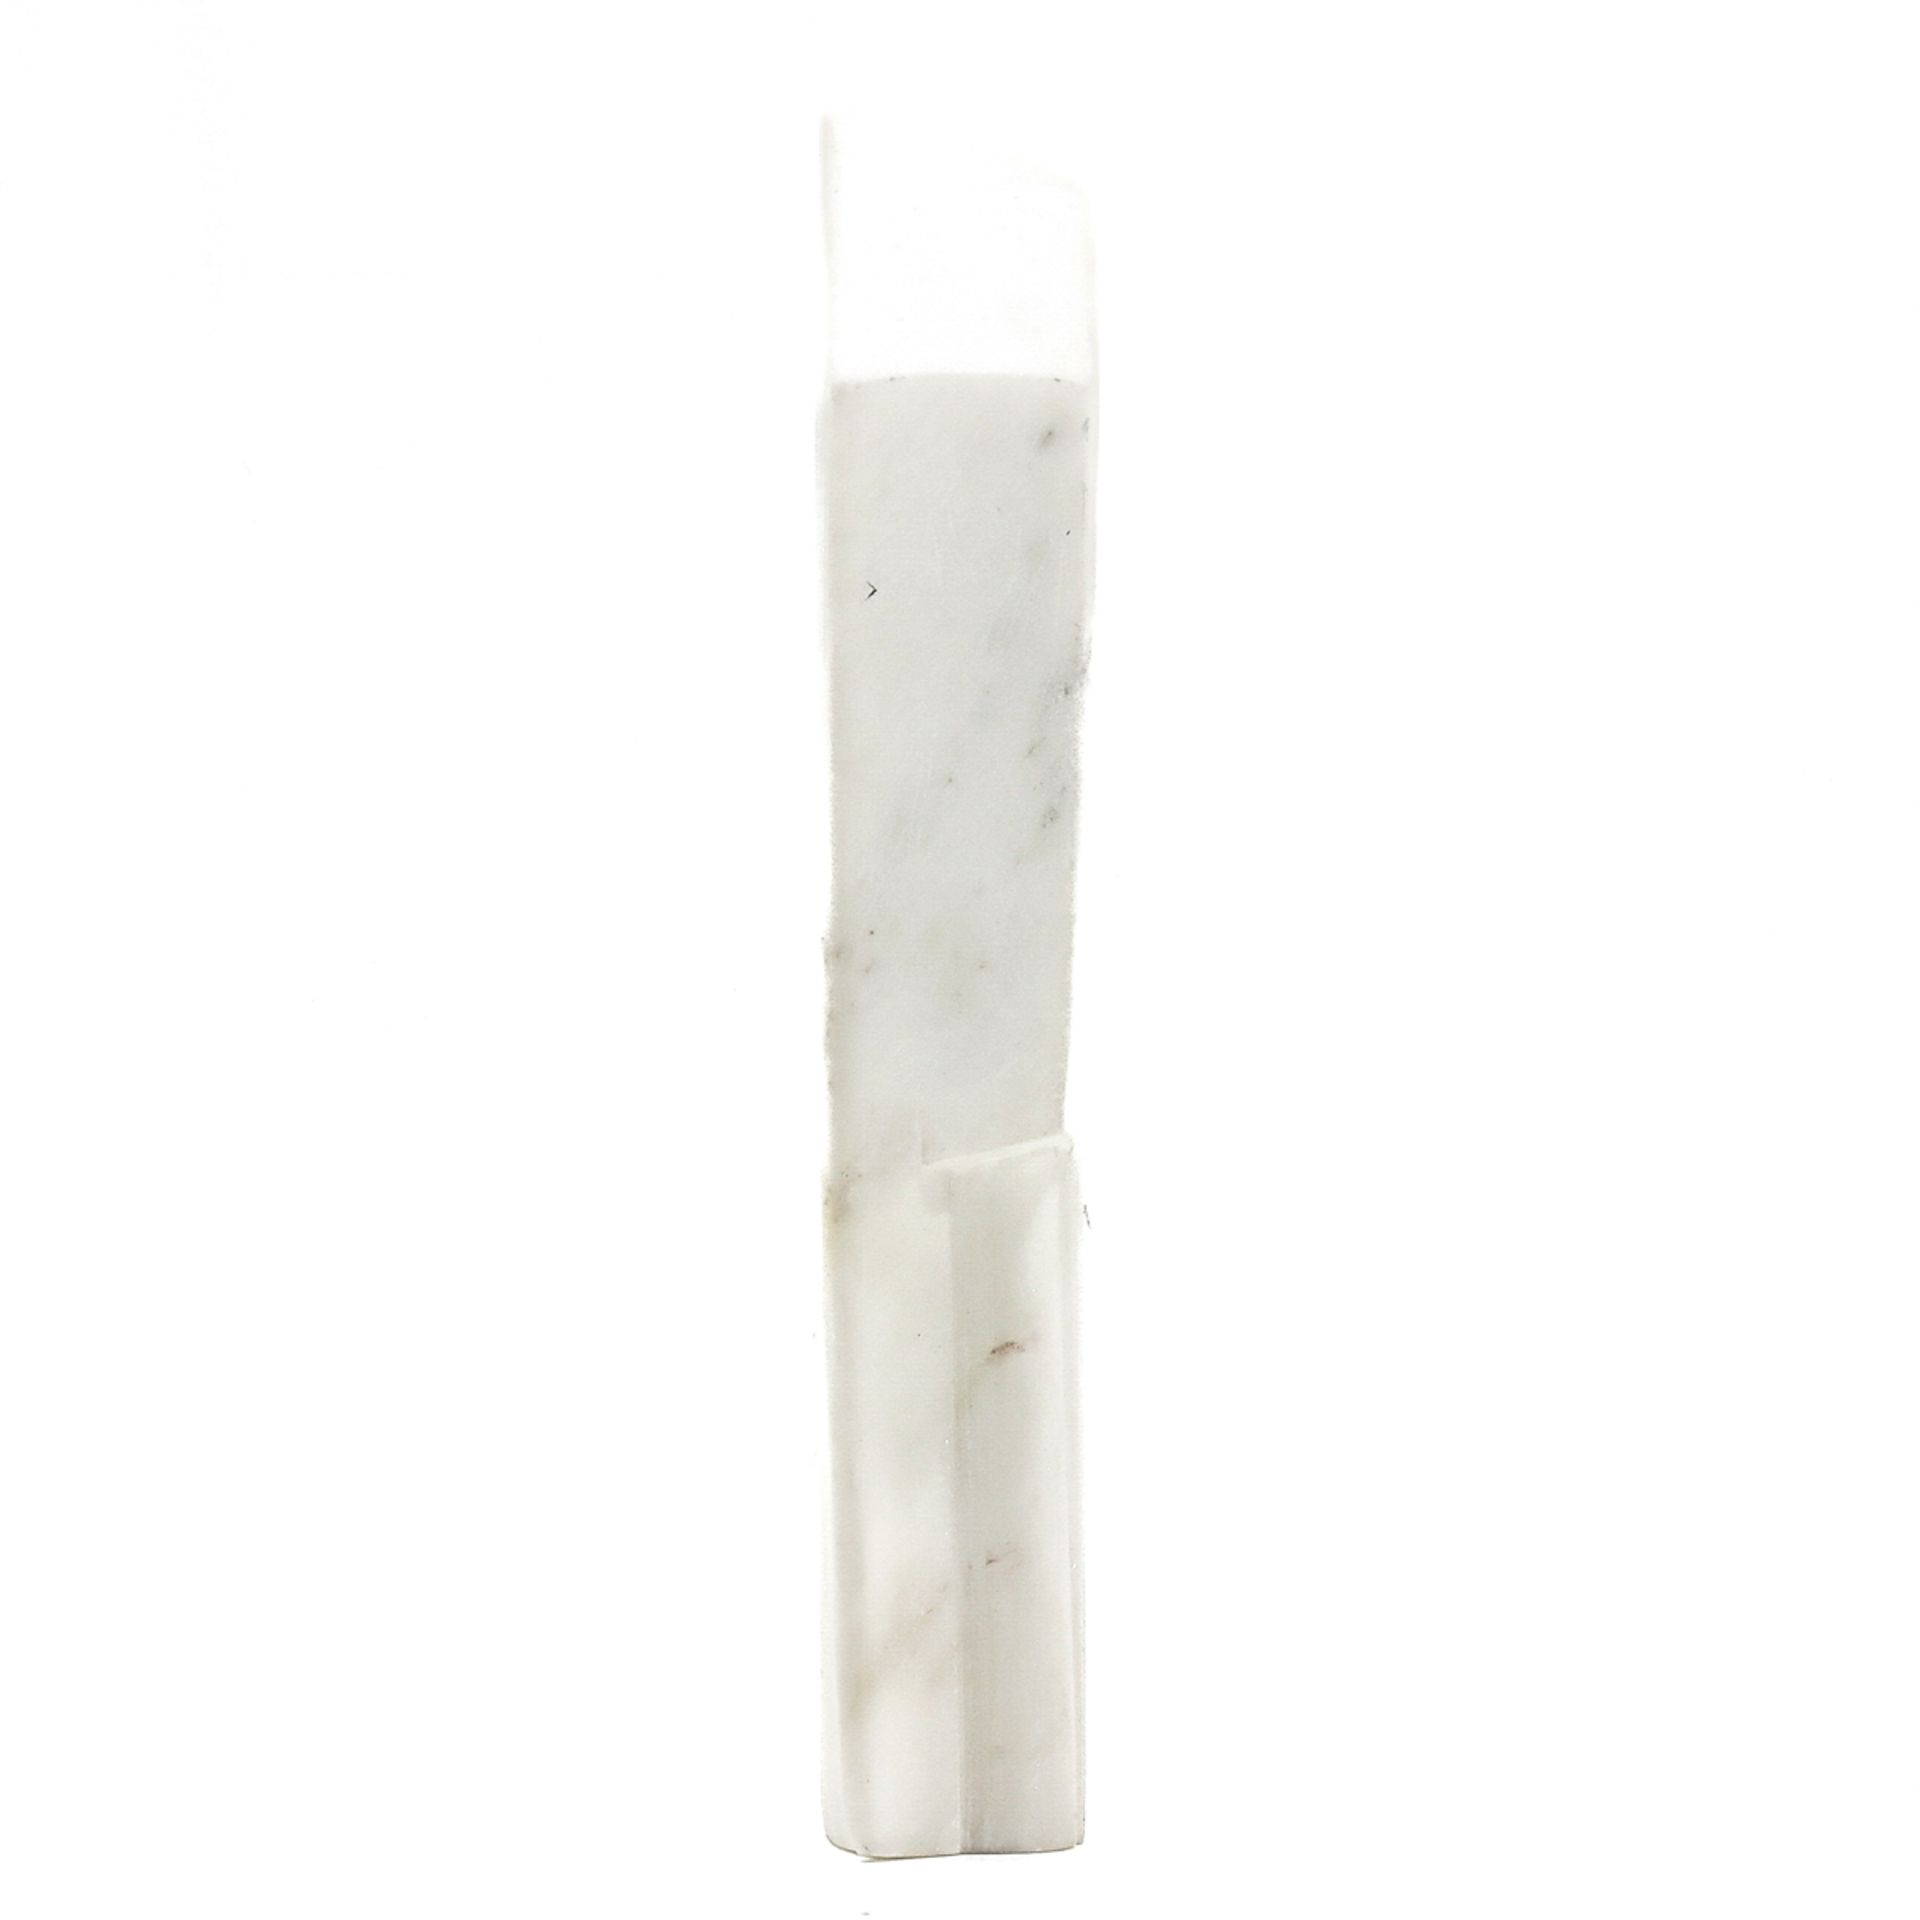 A Marble Sculpture - Image 4 of 9